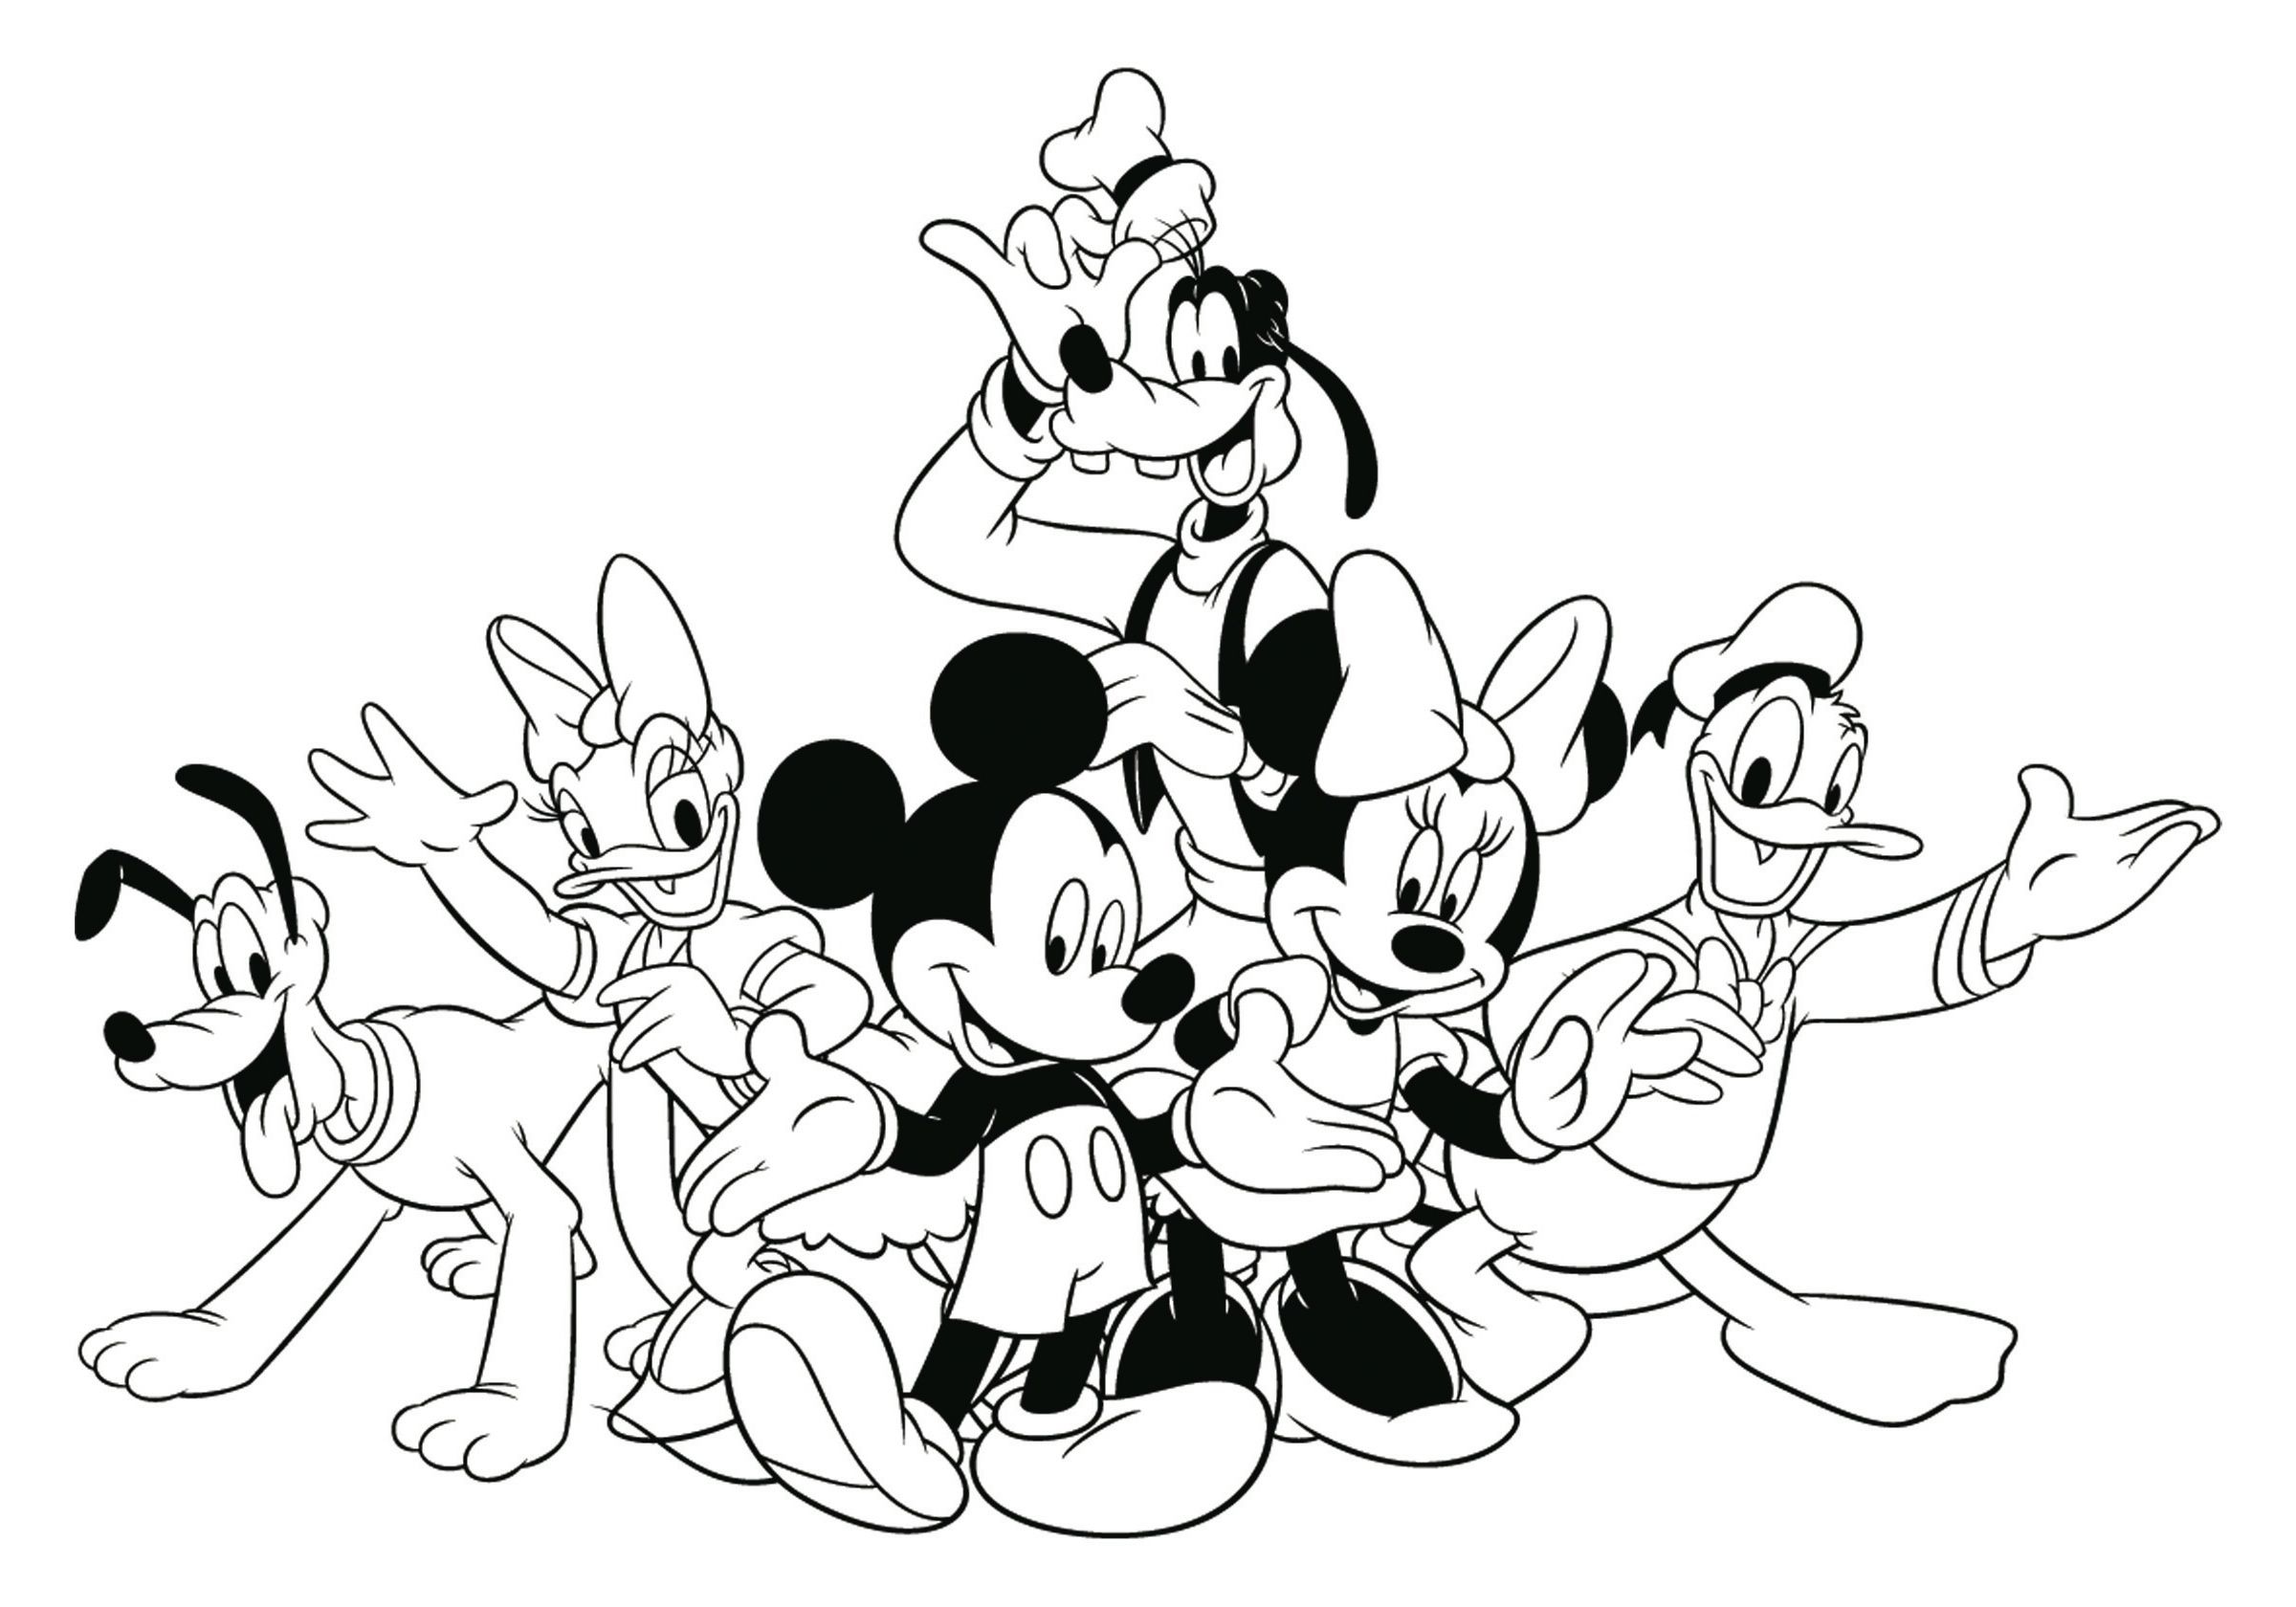 13 Free Pictures for: Mickey Mouse Coloring Pages. Temoon.us